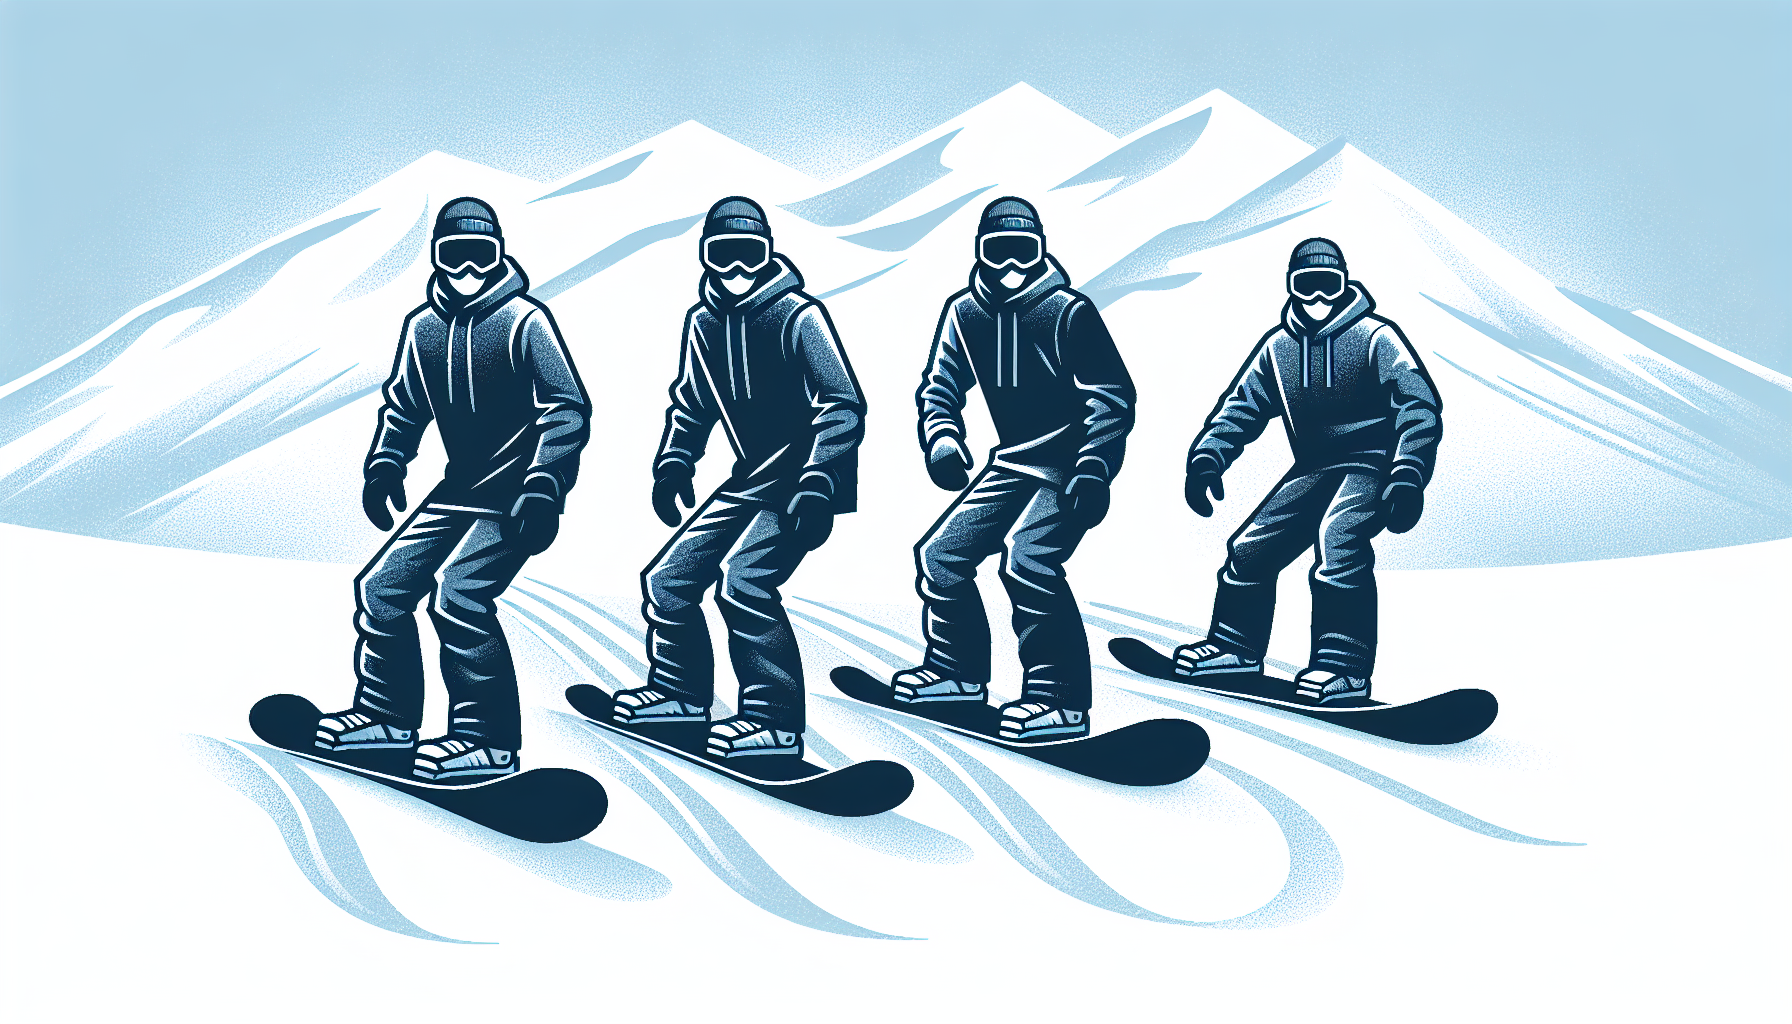 Different snowboard stance width options